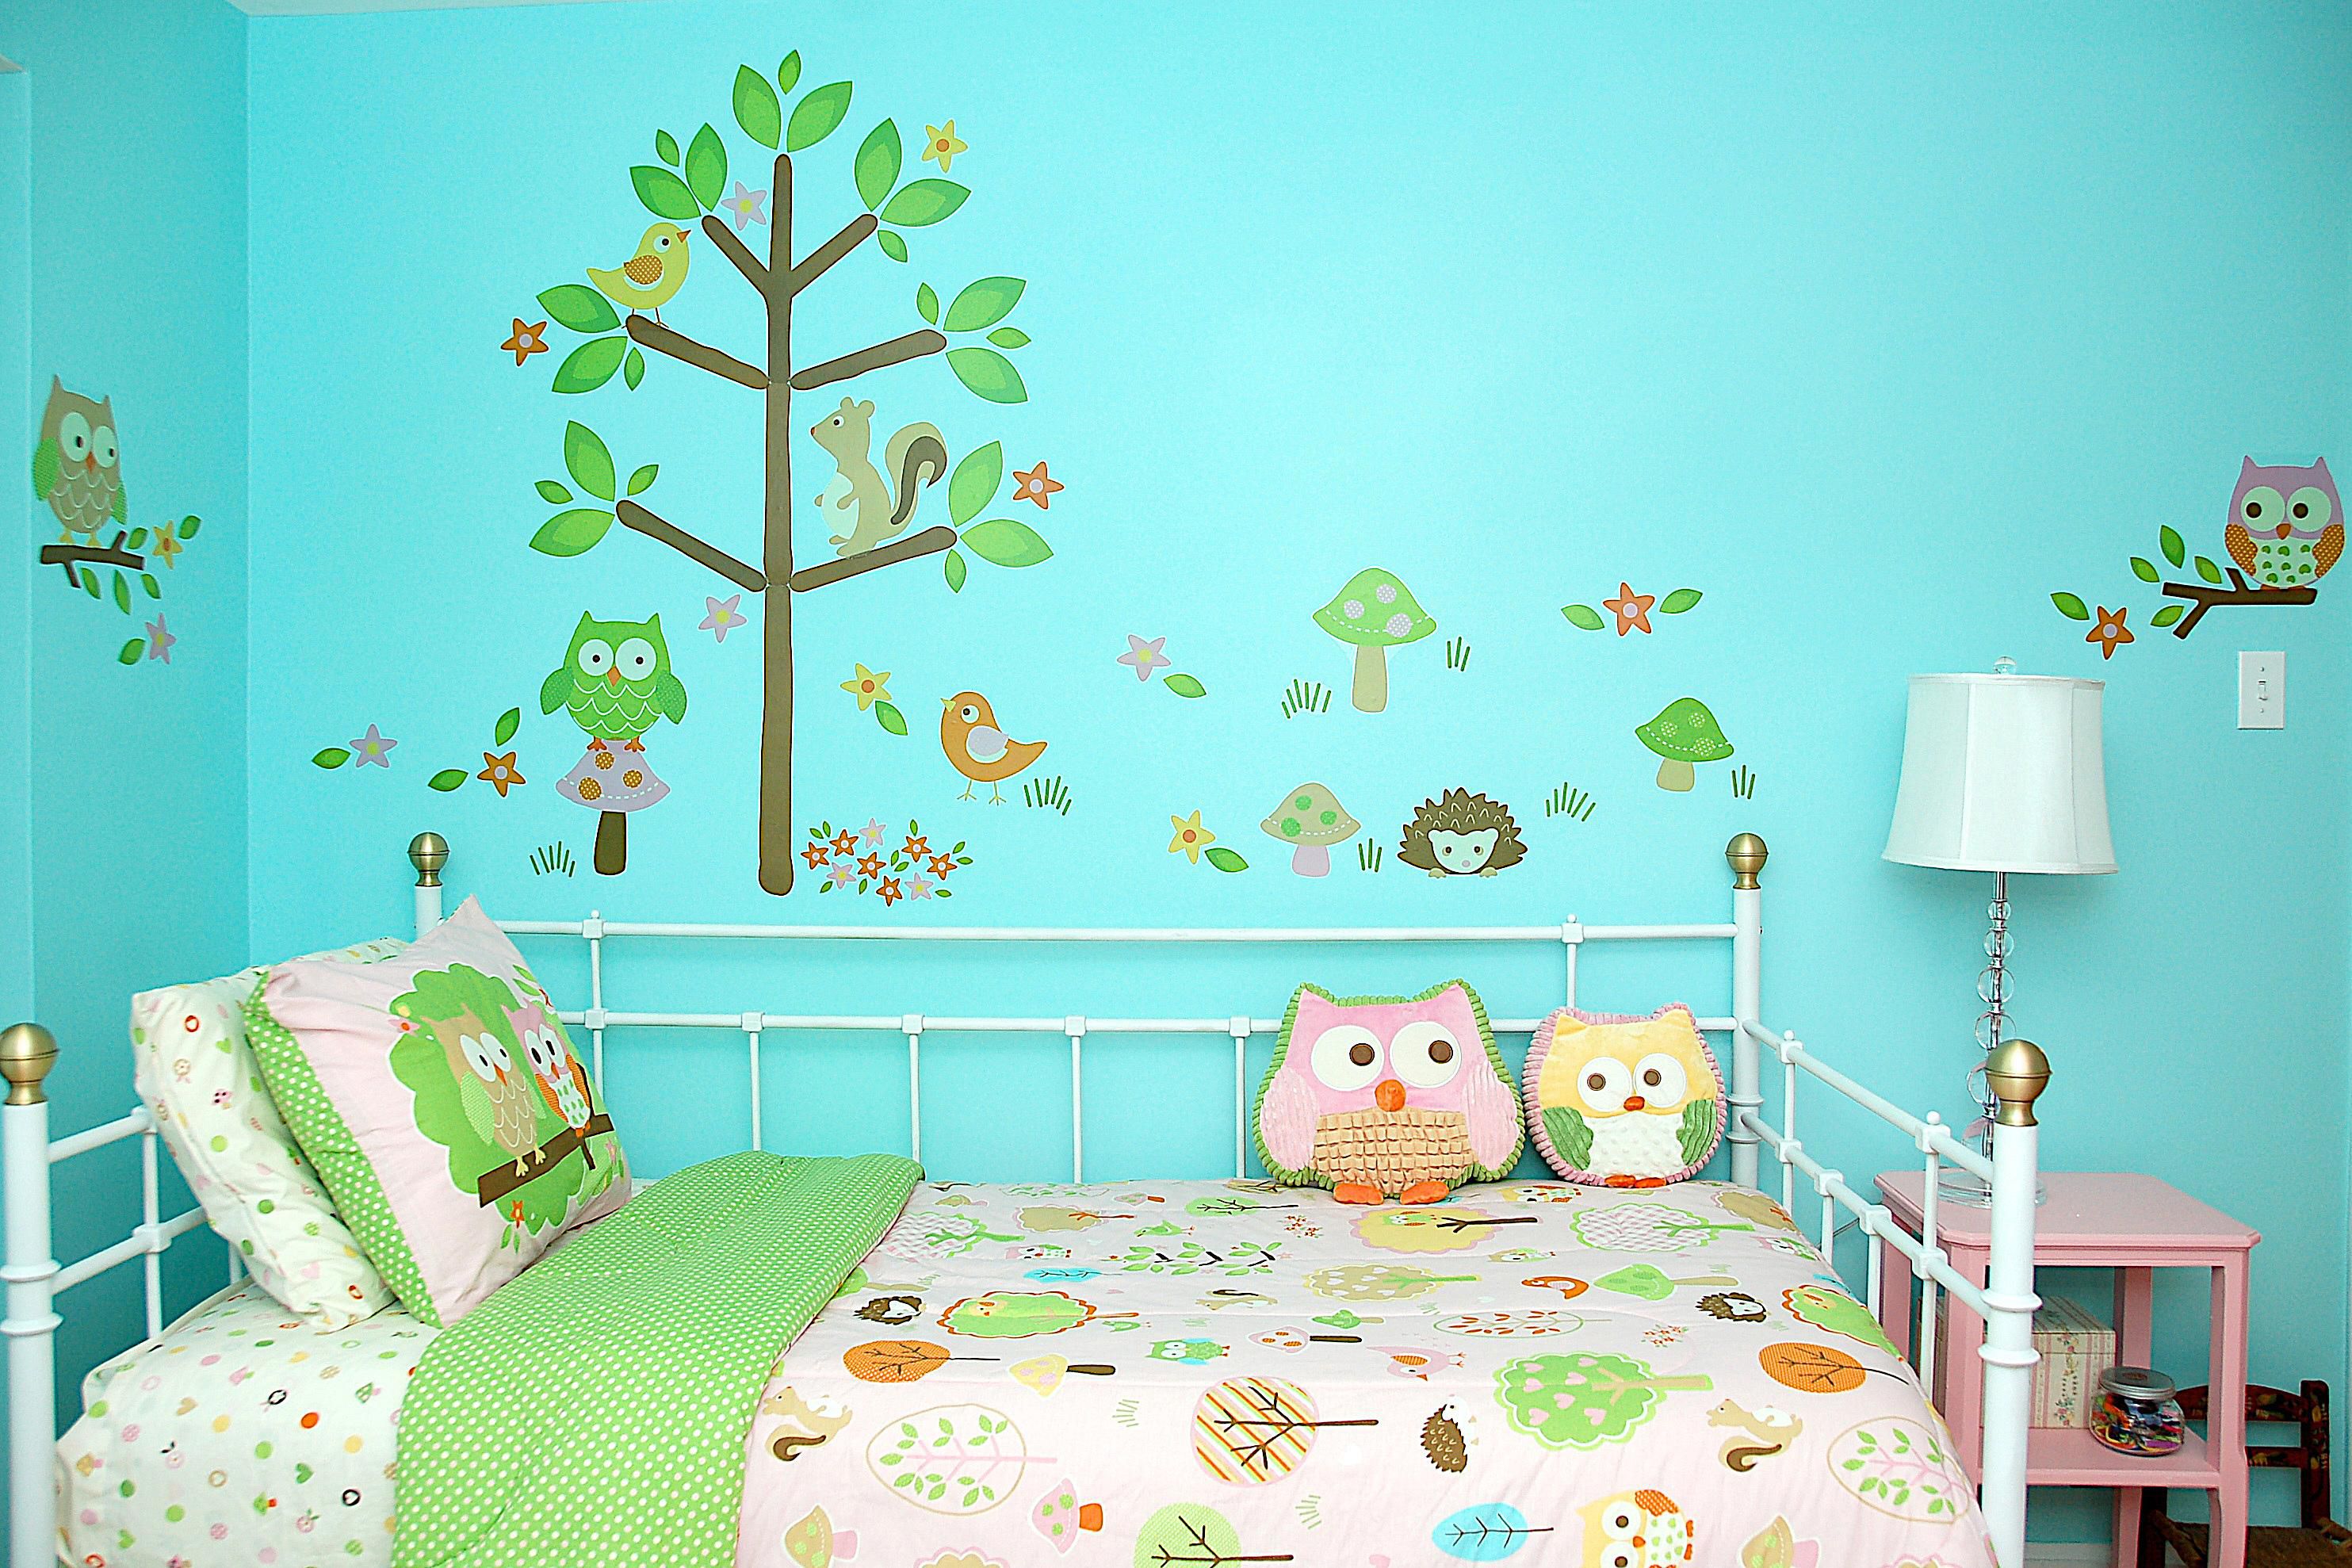 Tips For Decorating A Child's Bedroom